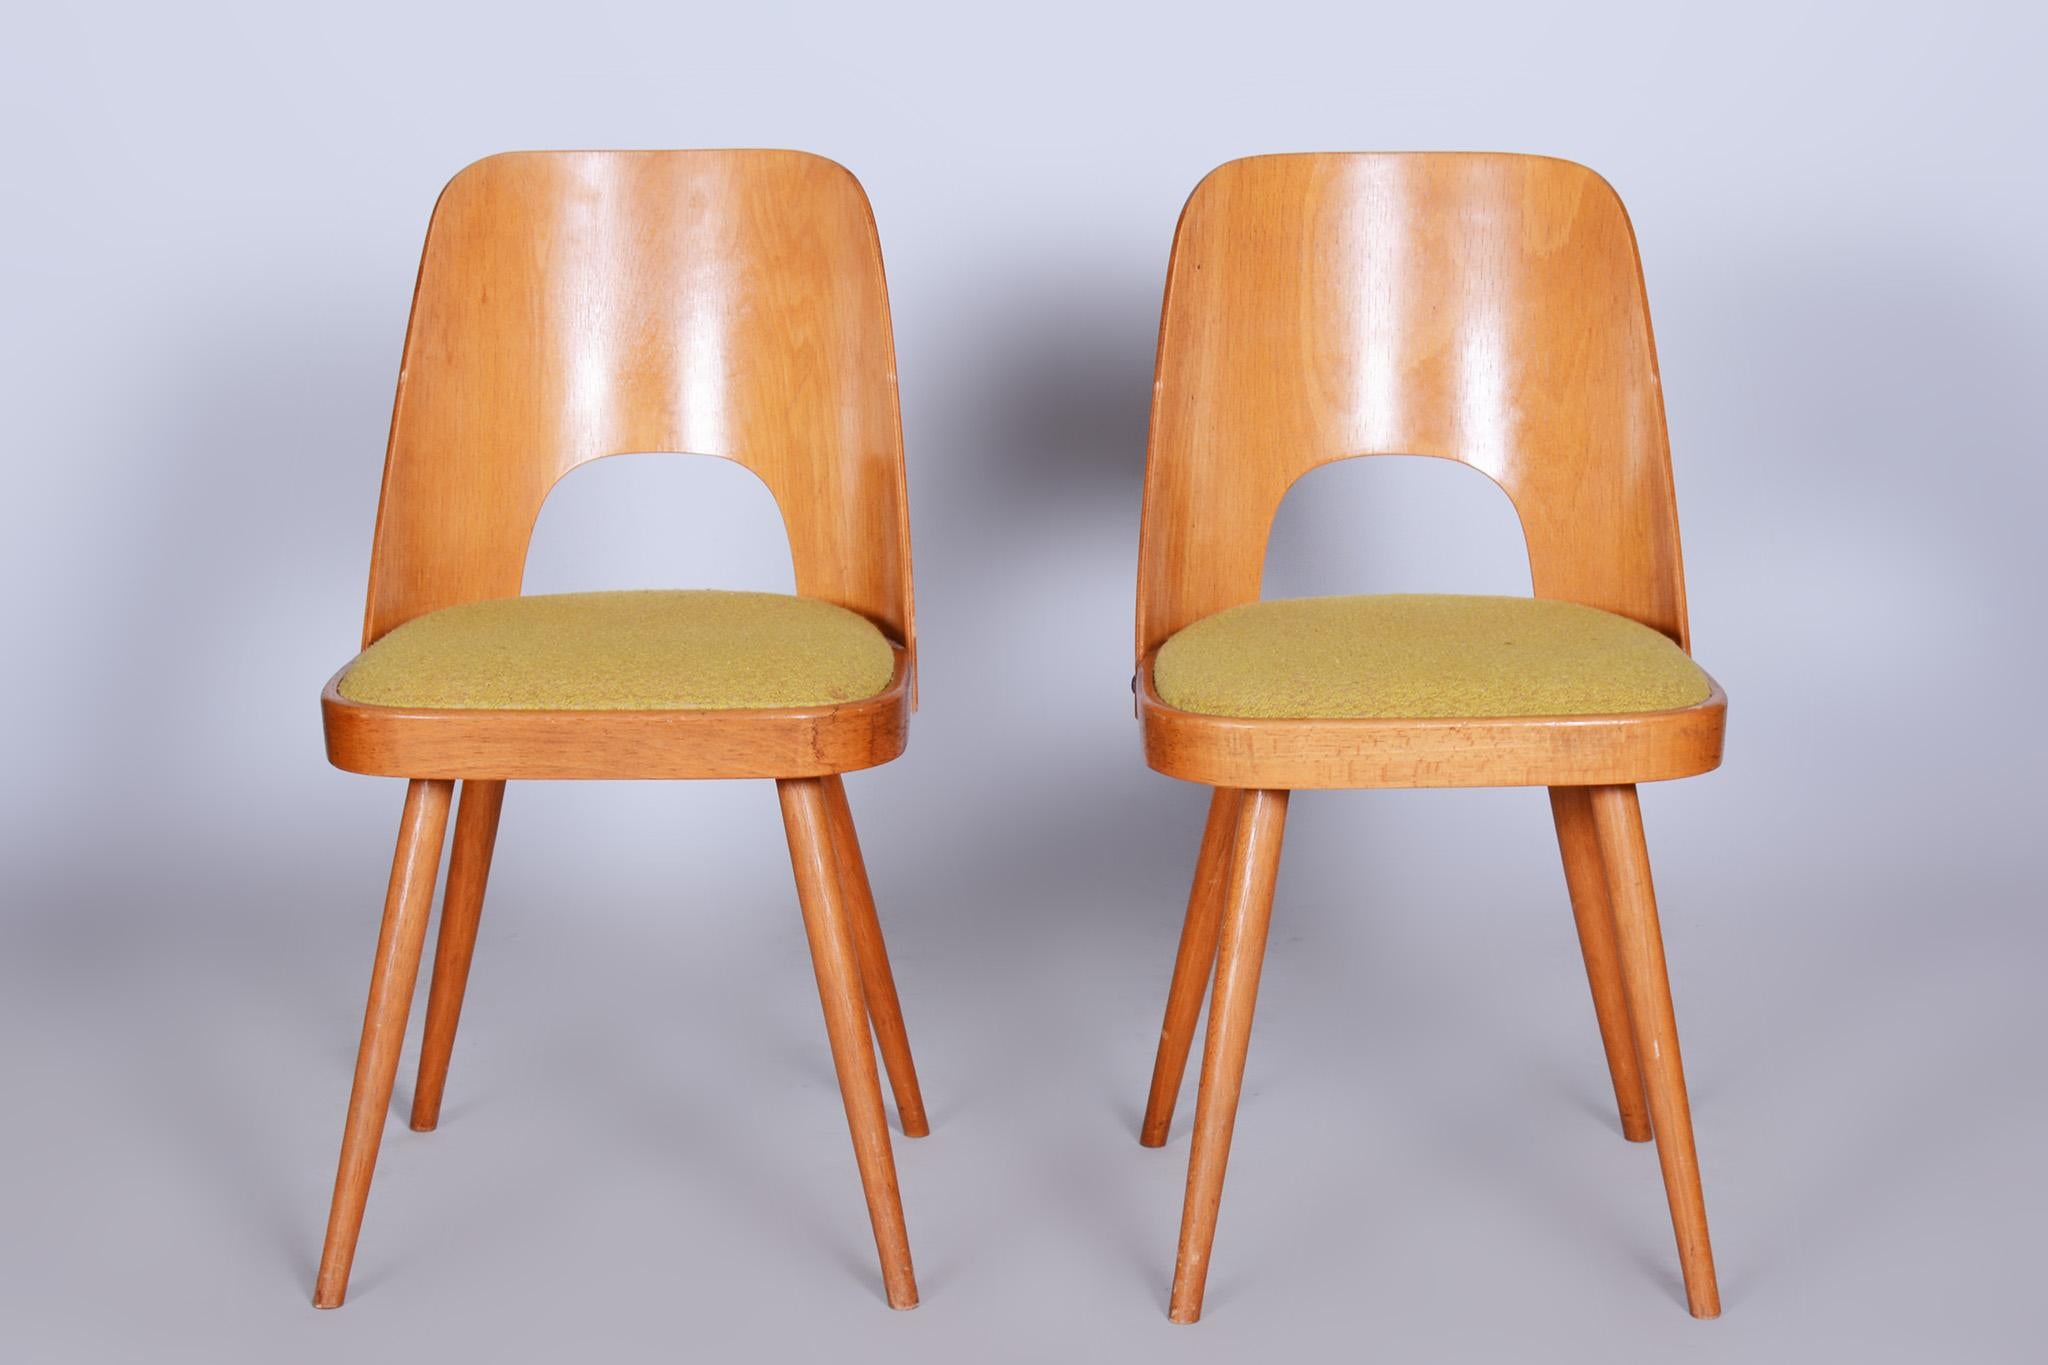 Fabric Set of Mid-Century Brown and Yellow Beech Chairs, Oswald Haerdtl, 1950s, Czechia For Sale